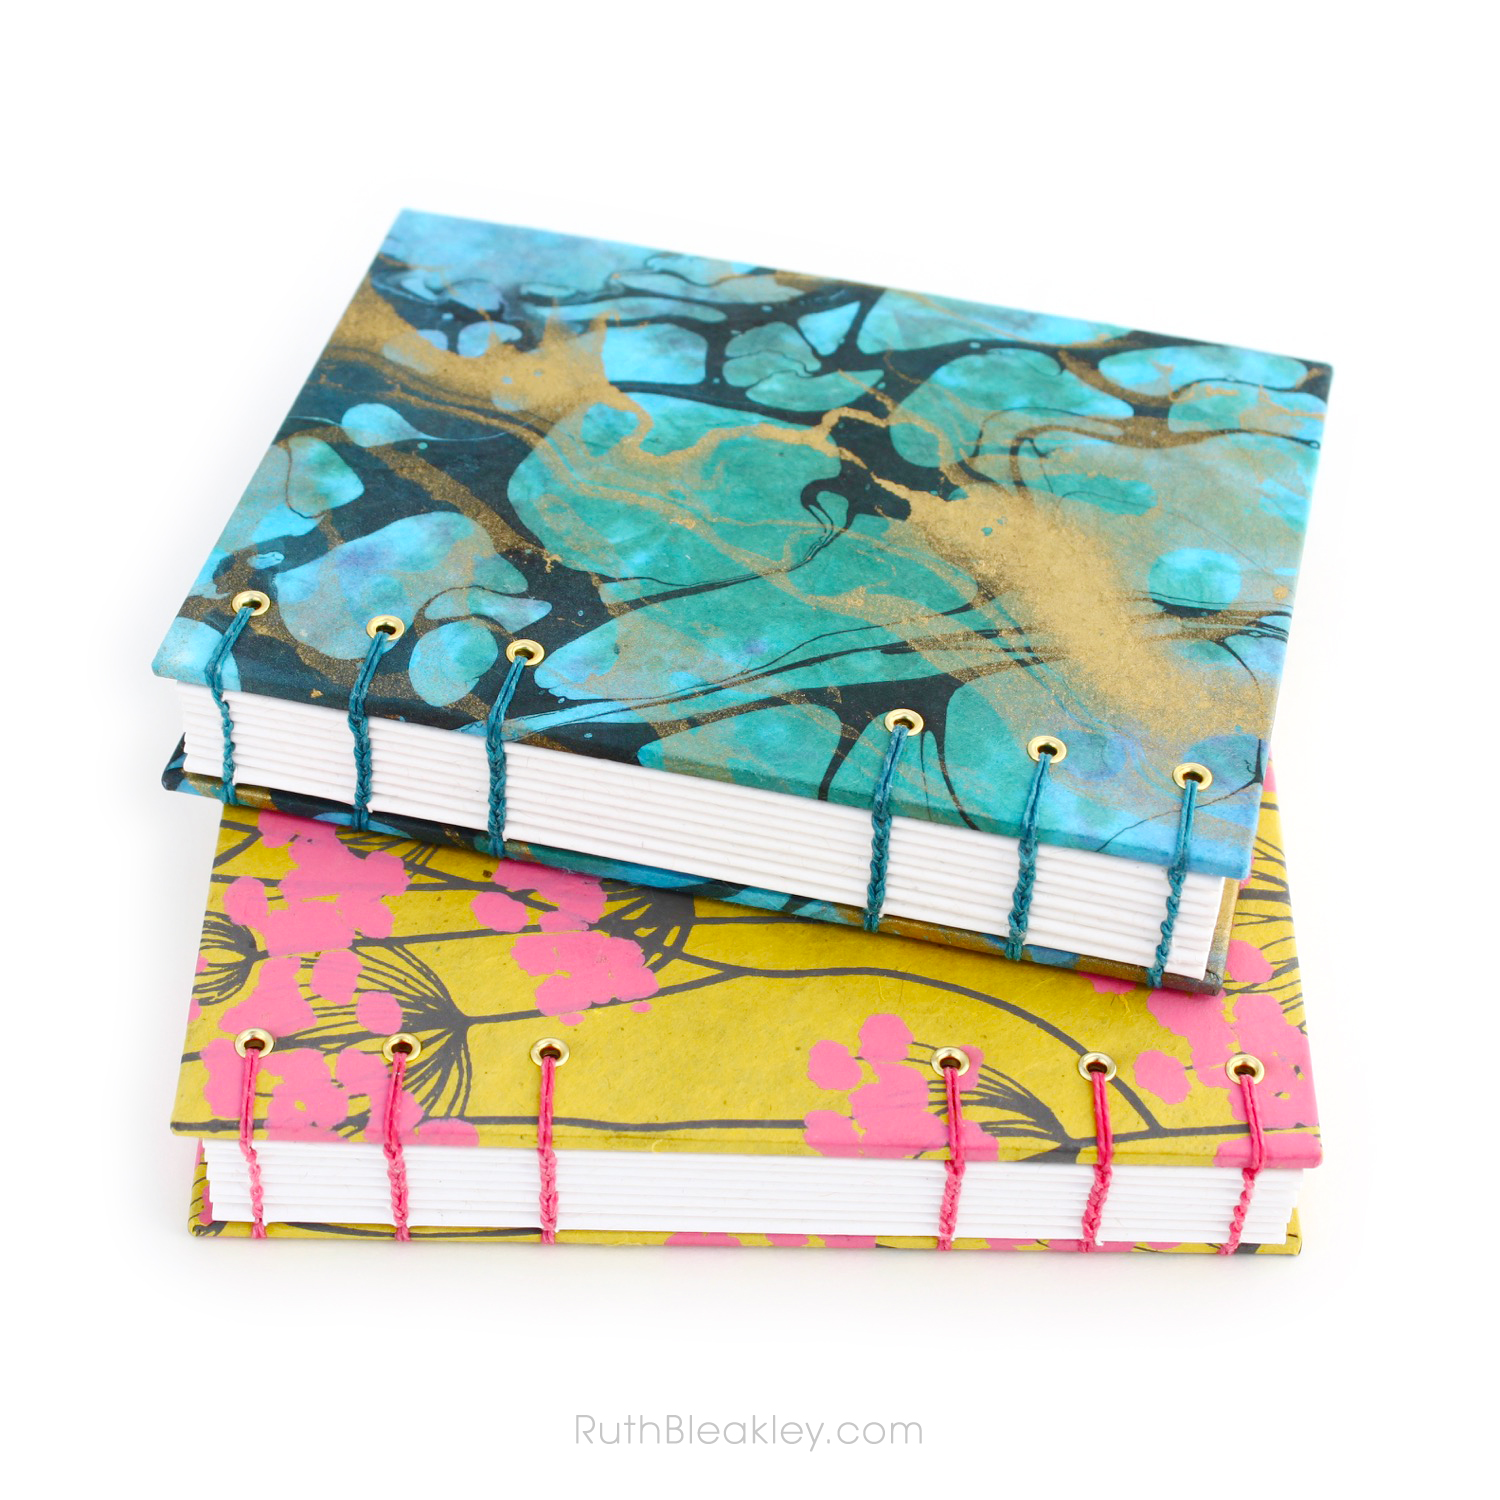 Unlined Blank Sketch Journal handmade by Ruth Bleakley from Indian floral paper - colorful gifts for artists